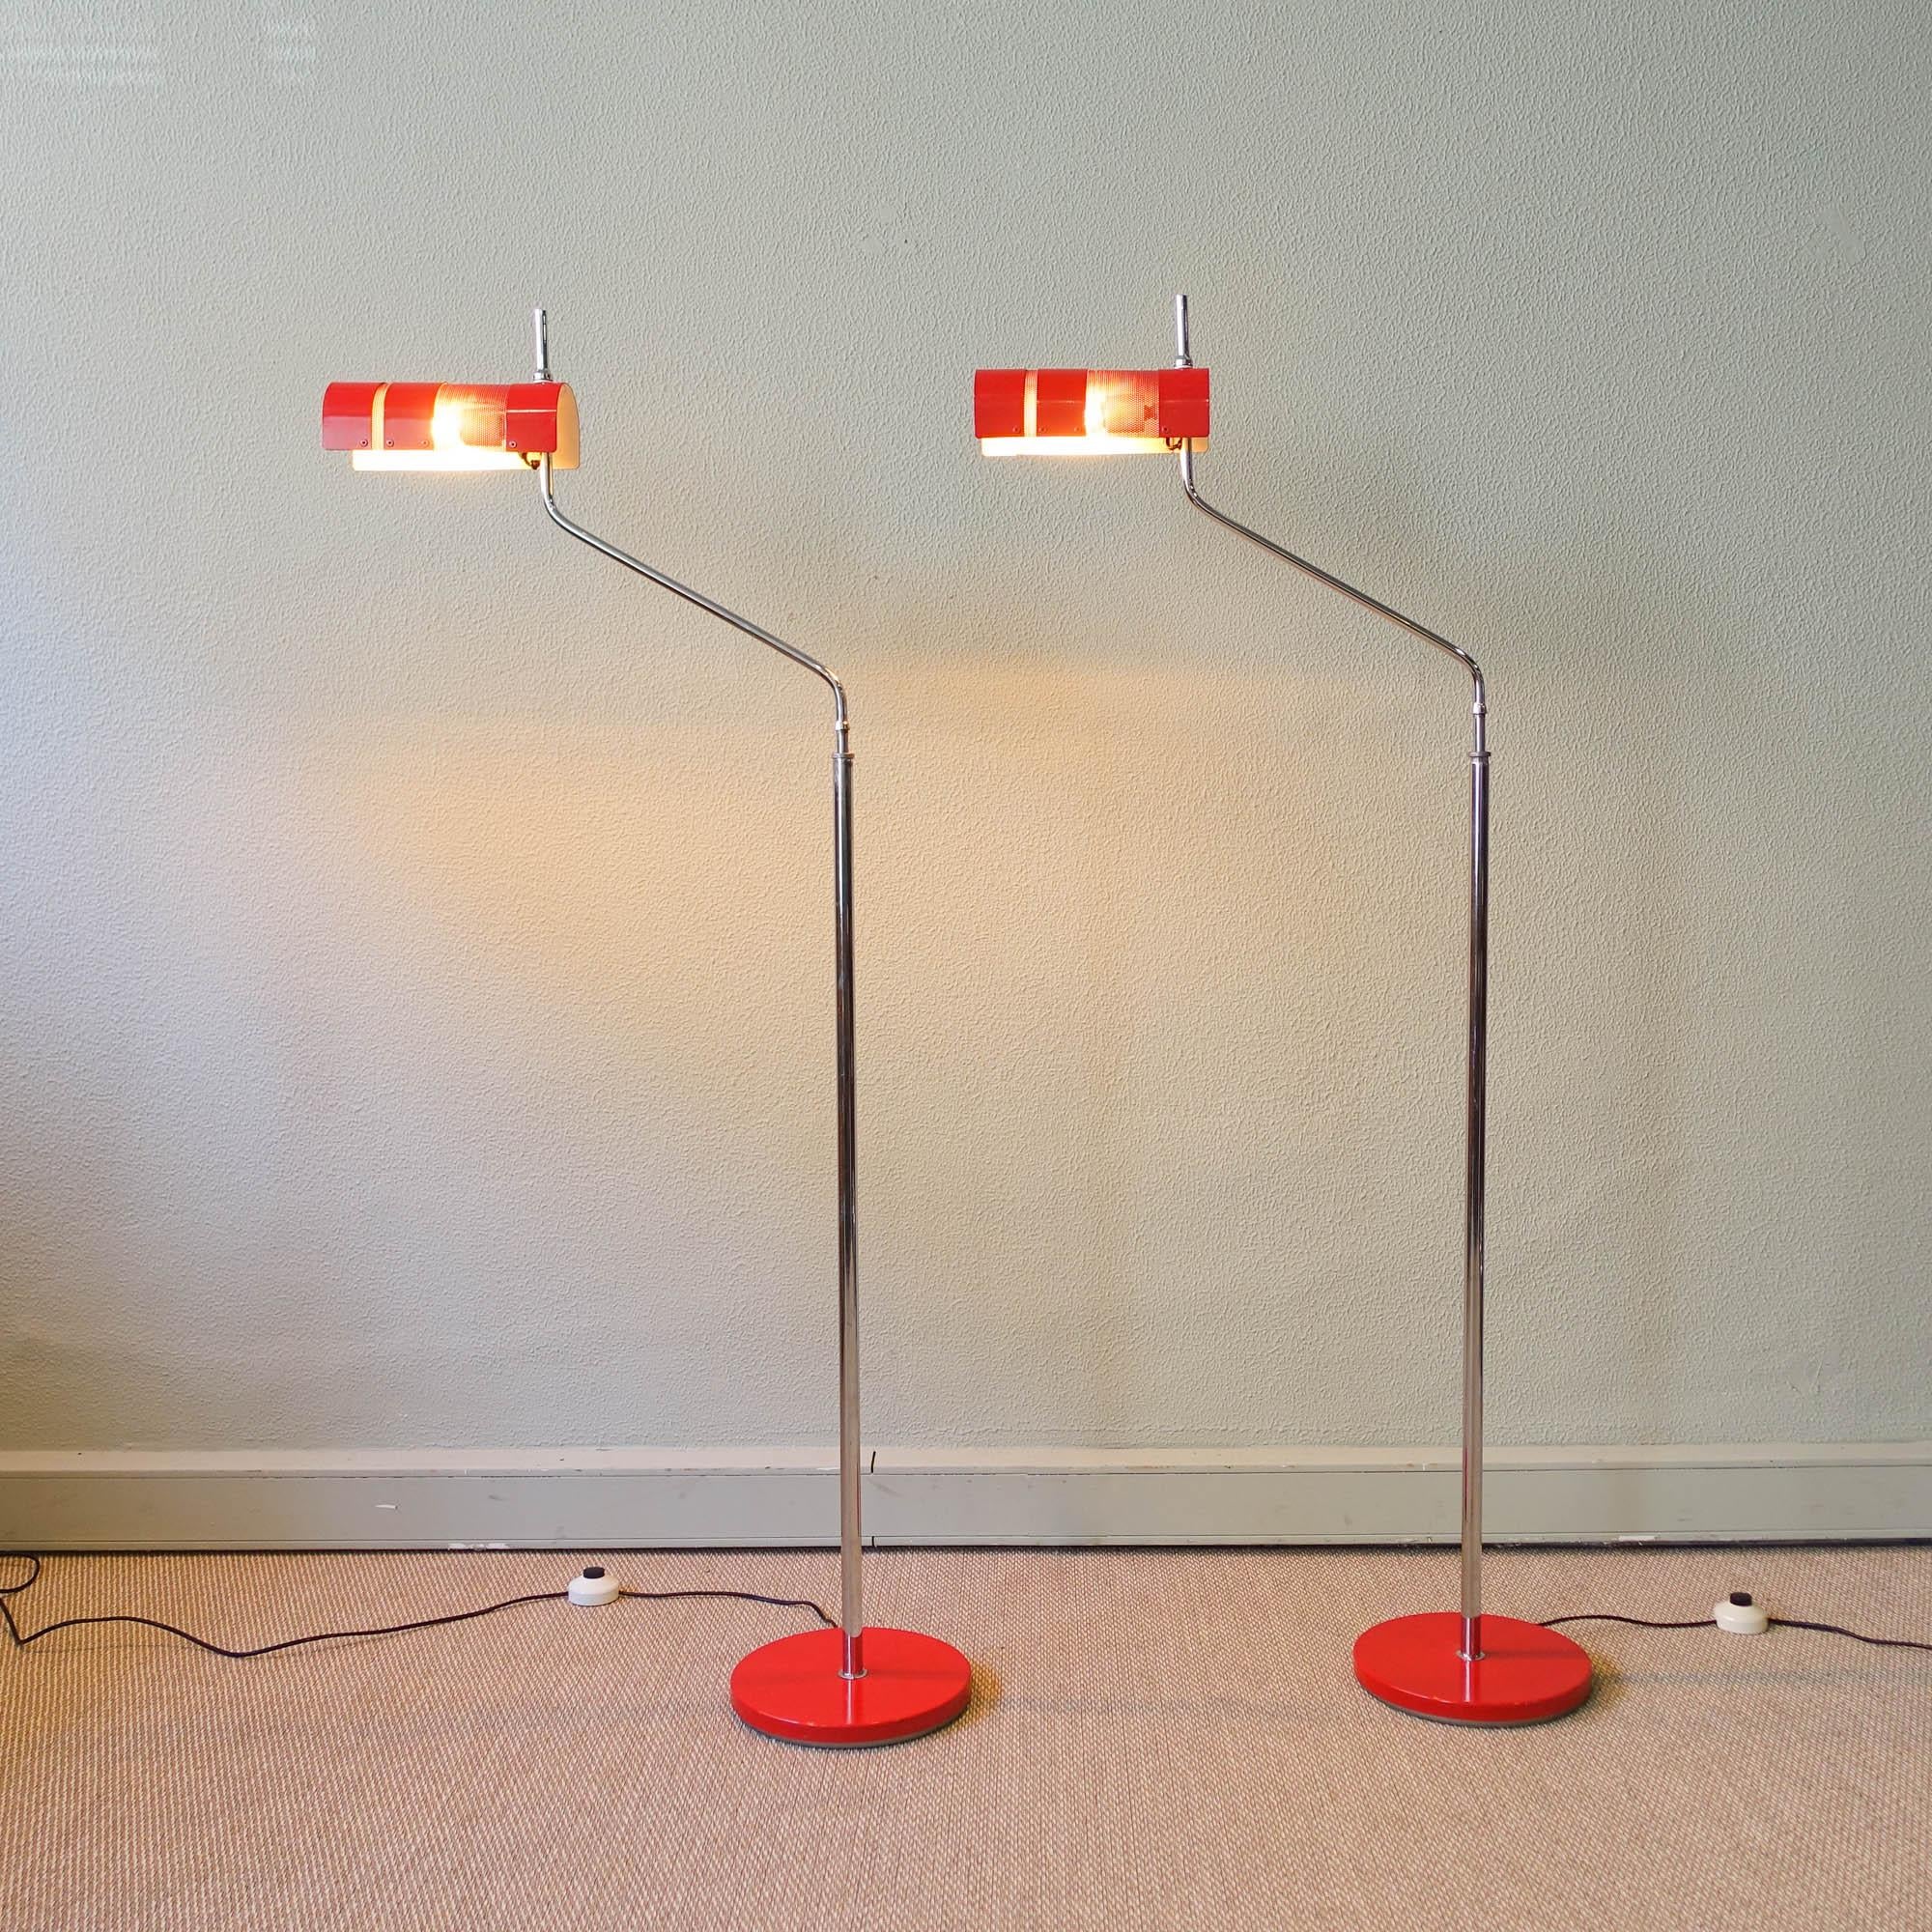 This floor lamp, model TEIDE, was designed by Gabriel Teixido, for Fase Madrid, in 1974.
It features a red shade and base with polished chrome arm. It is has a swivel shade and the arm rotates completely. It can also be adjusted by height. In an